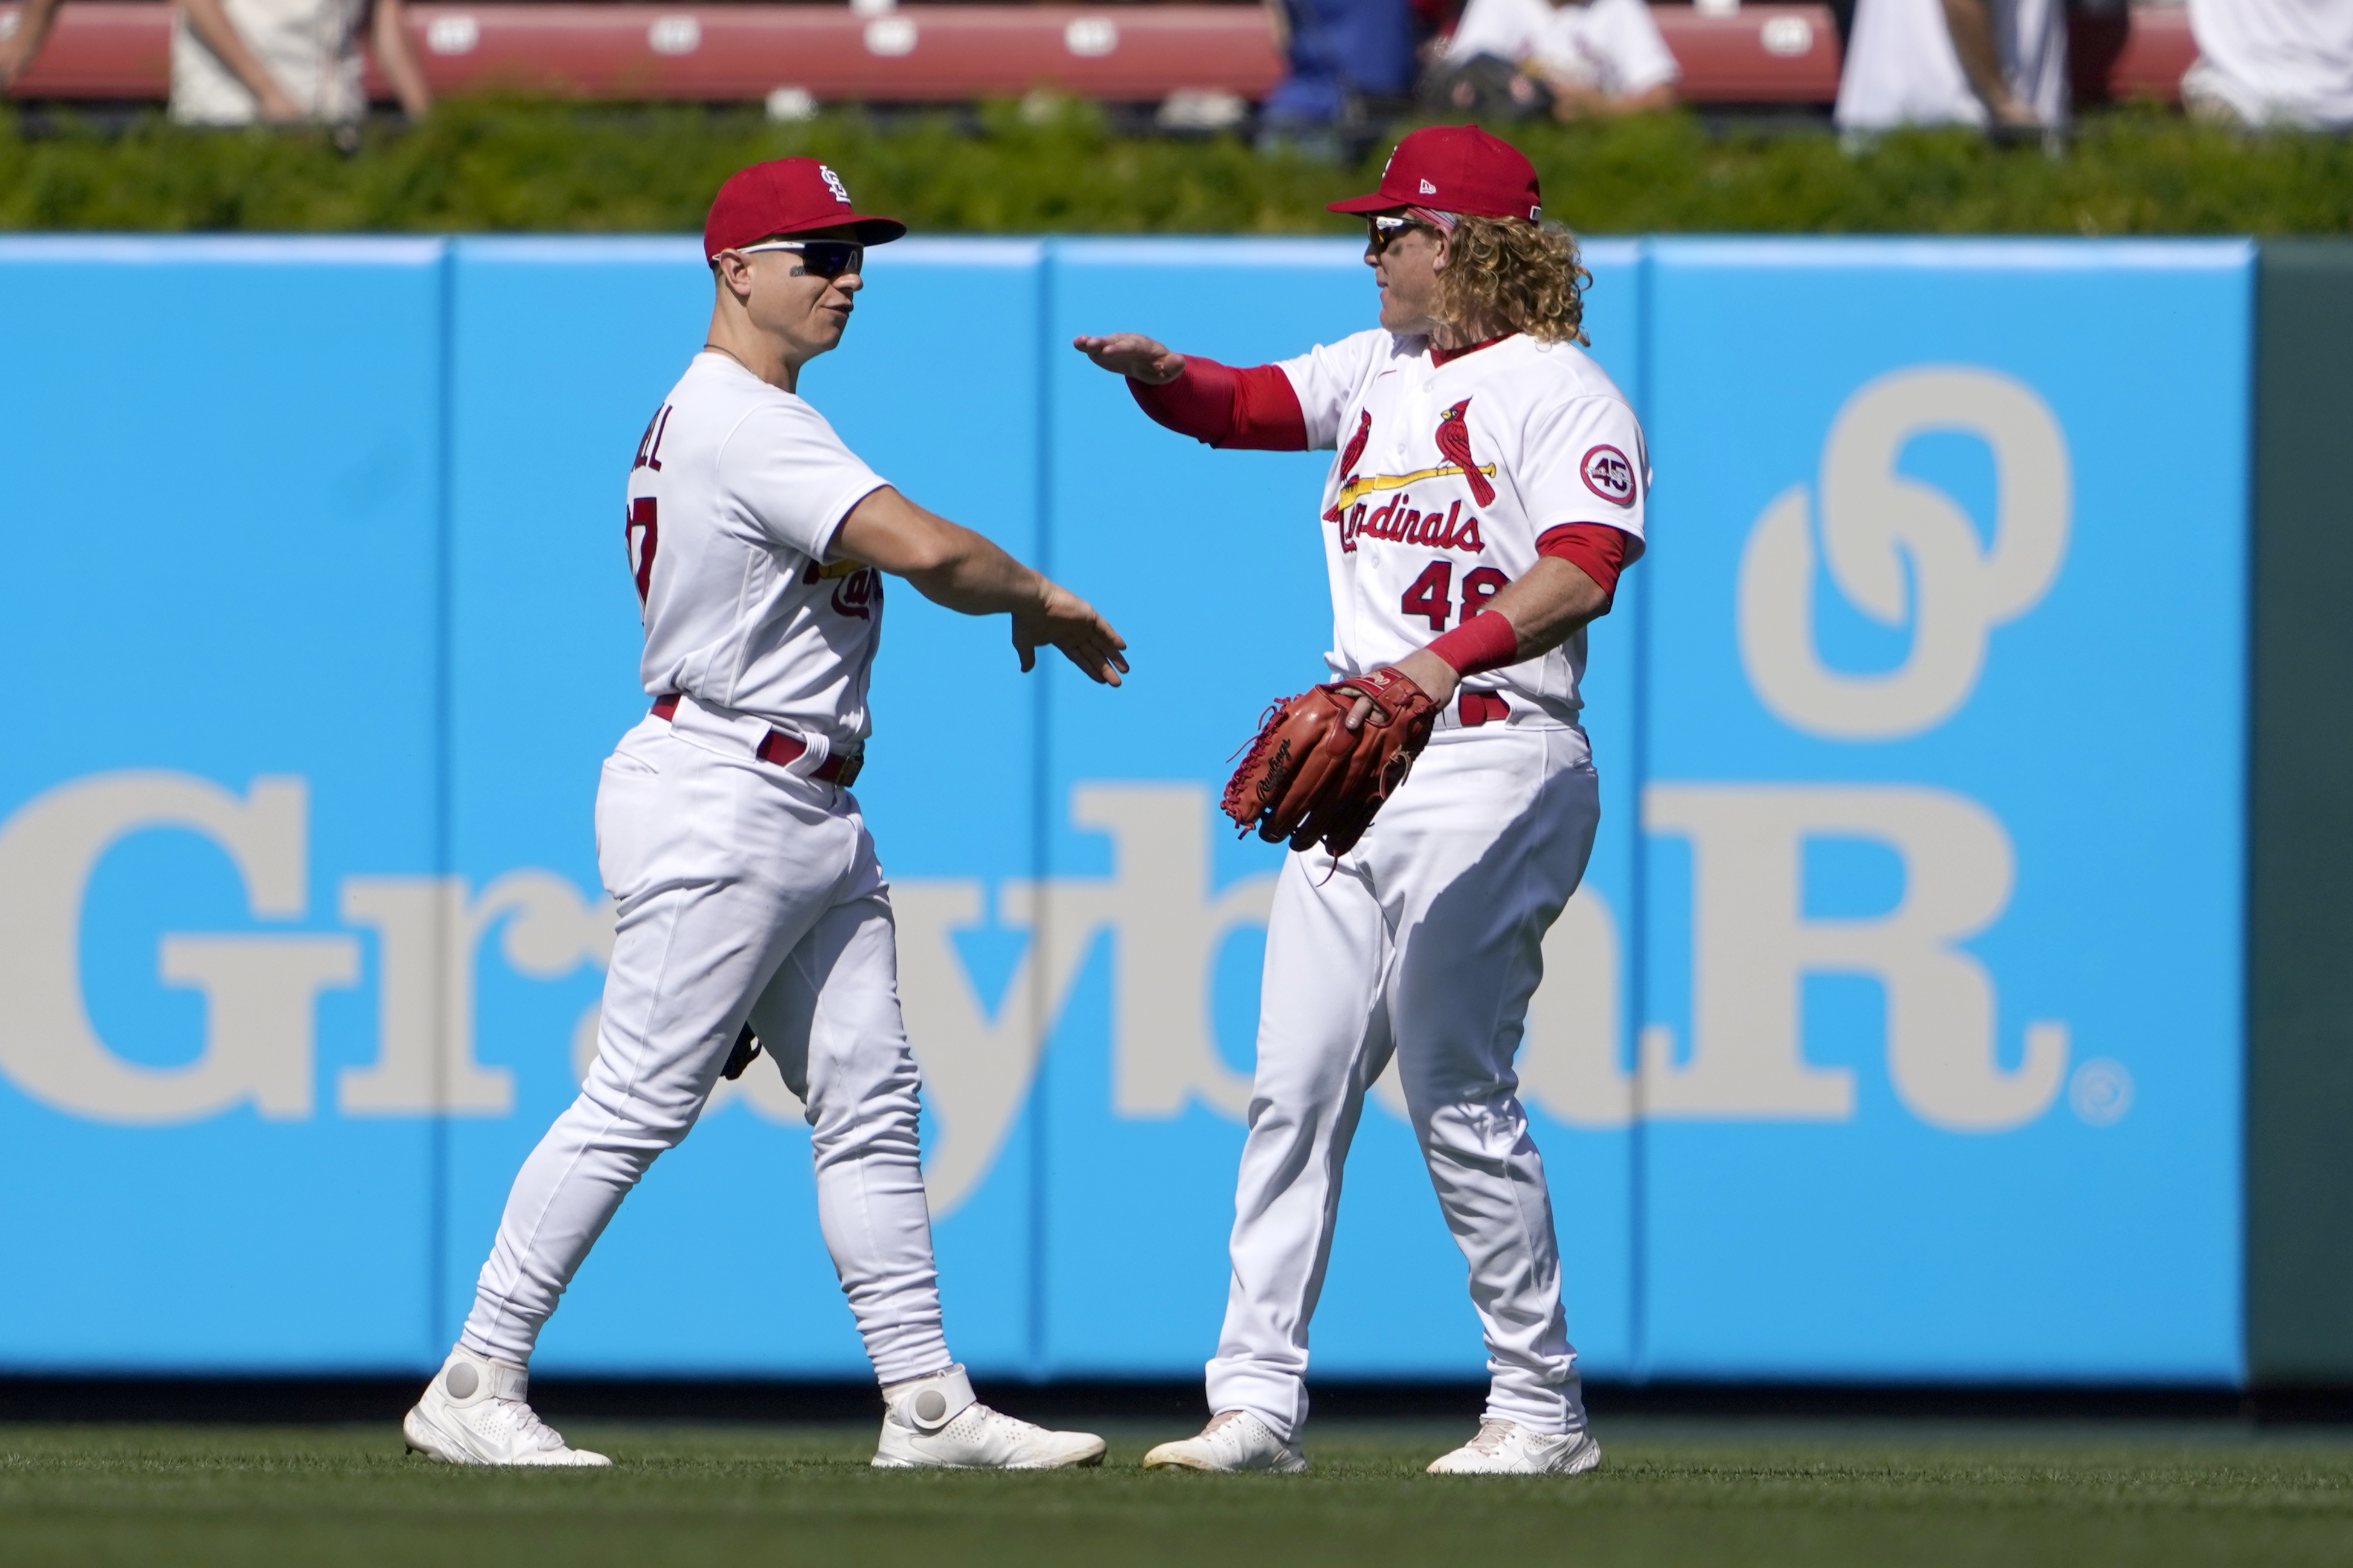 Canada's Tyler O'Neill homers for 3rd straight game as Cardinals